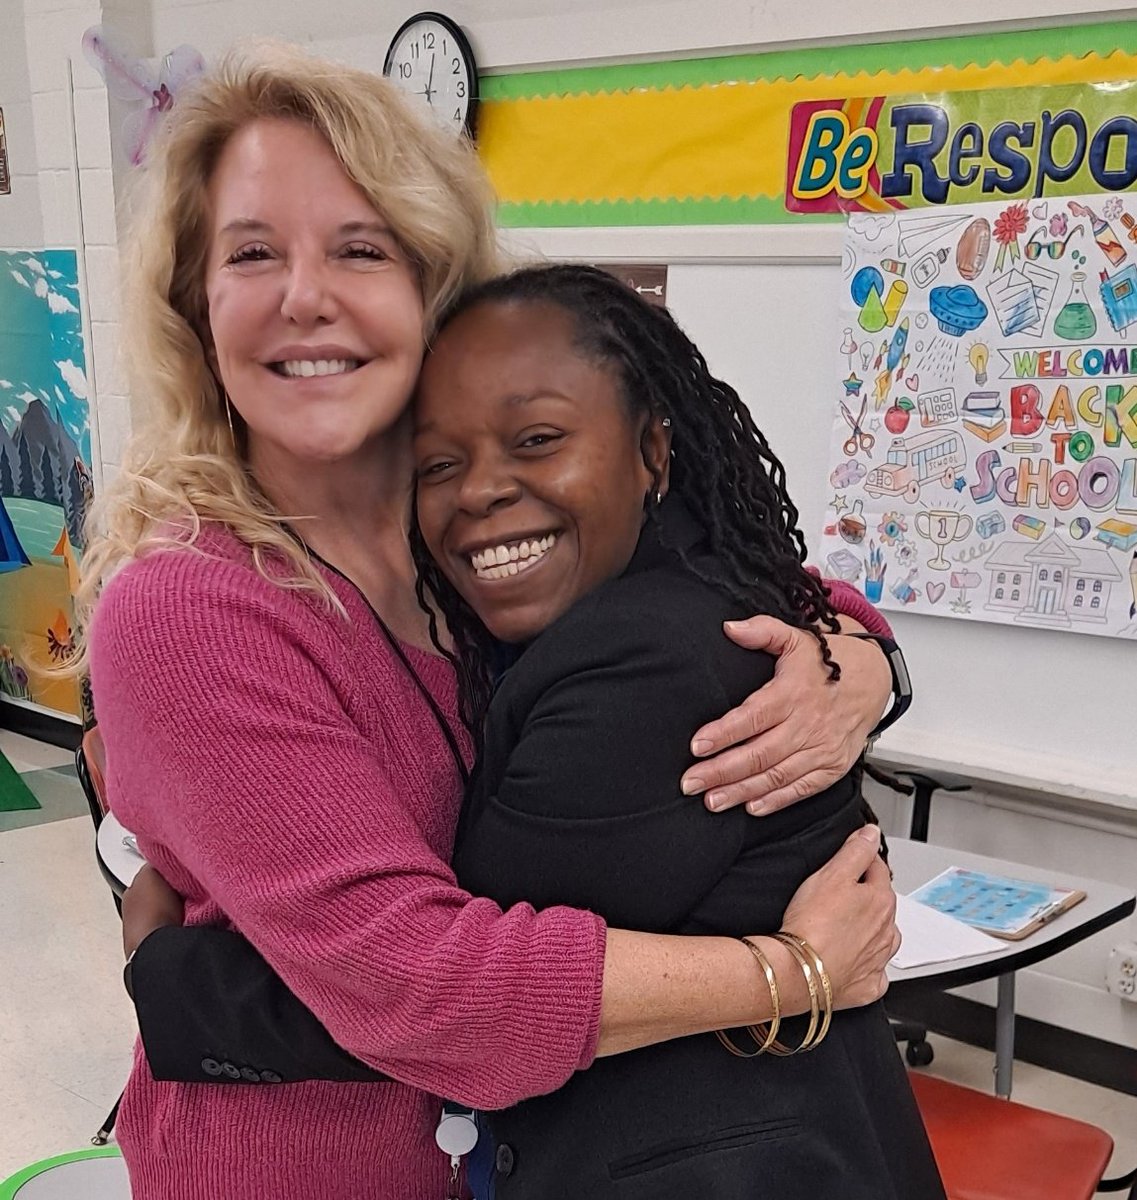 We had a visit from our @HISD_ACC Counseling Coordinator, Barbara Finkle, who just happens to be my favorite teacher of all time from 4th grade at Poe ES! We've had a lifelong connection & I'm so glad she's still part of my life seeing me lead all grown up!